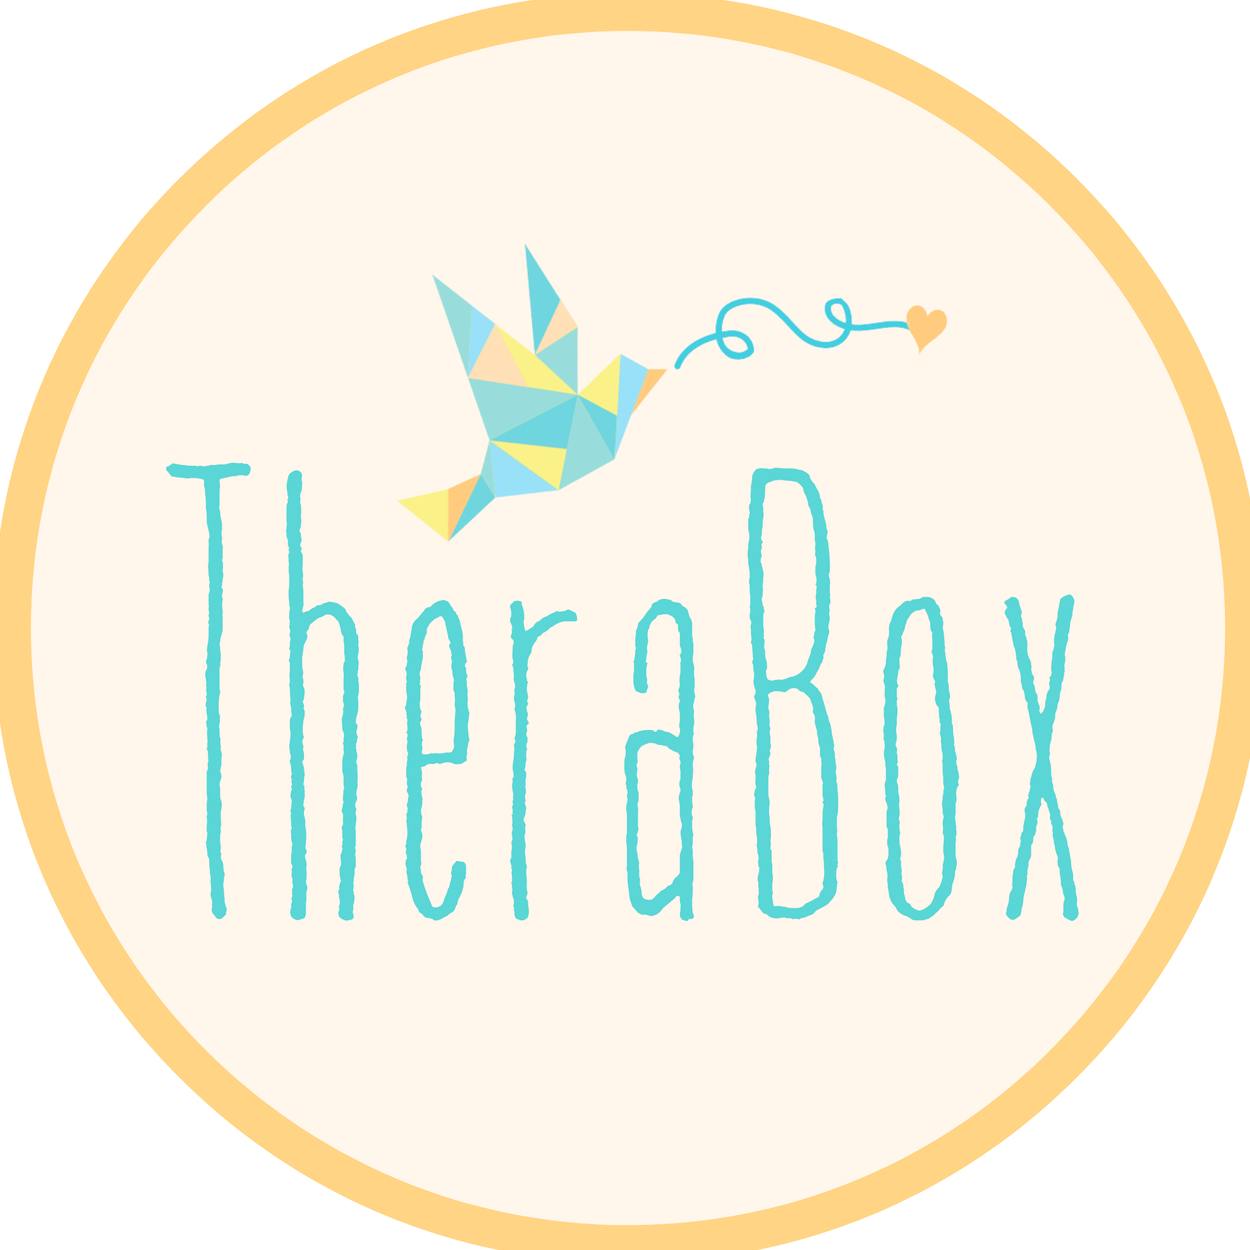 10% Off your entire purchase on TheraBox